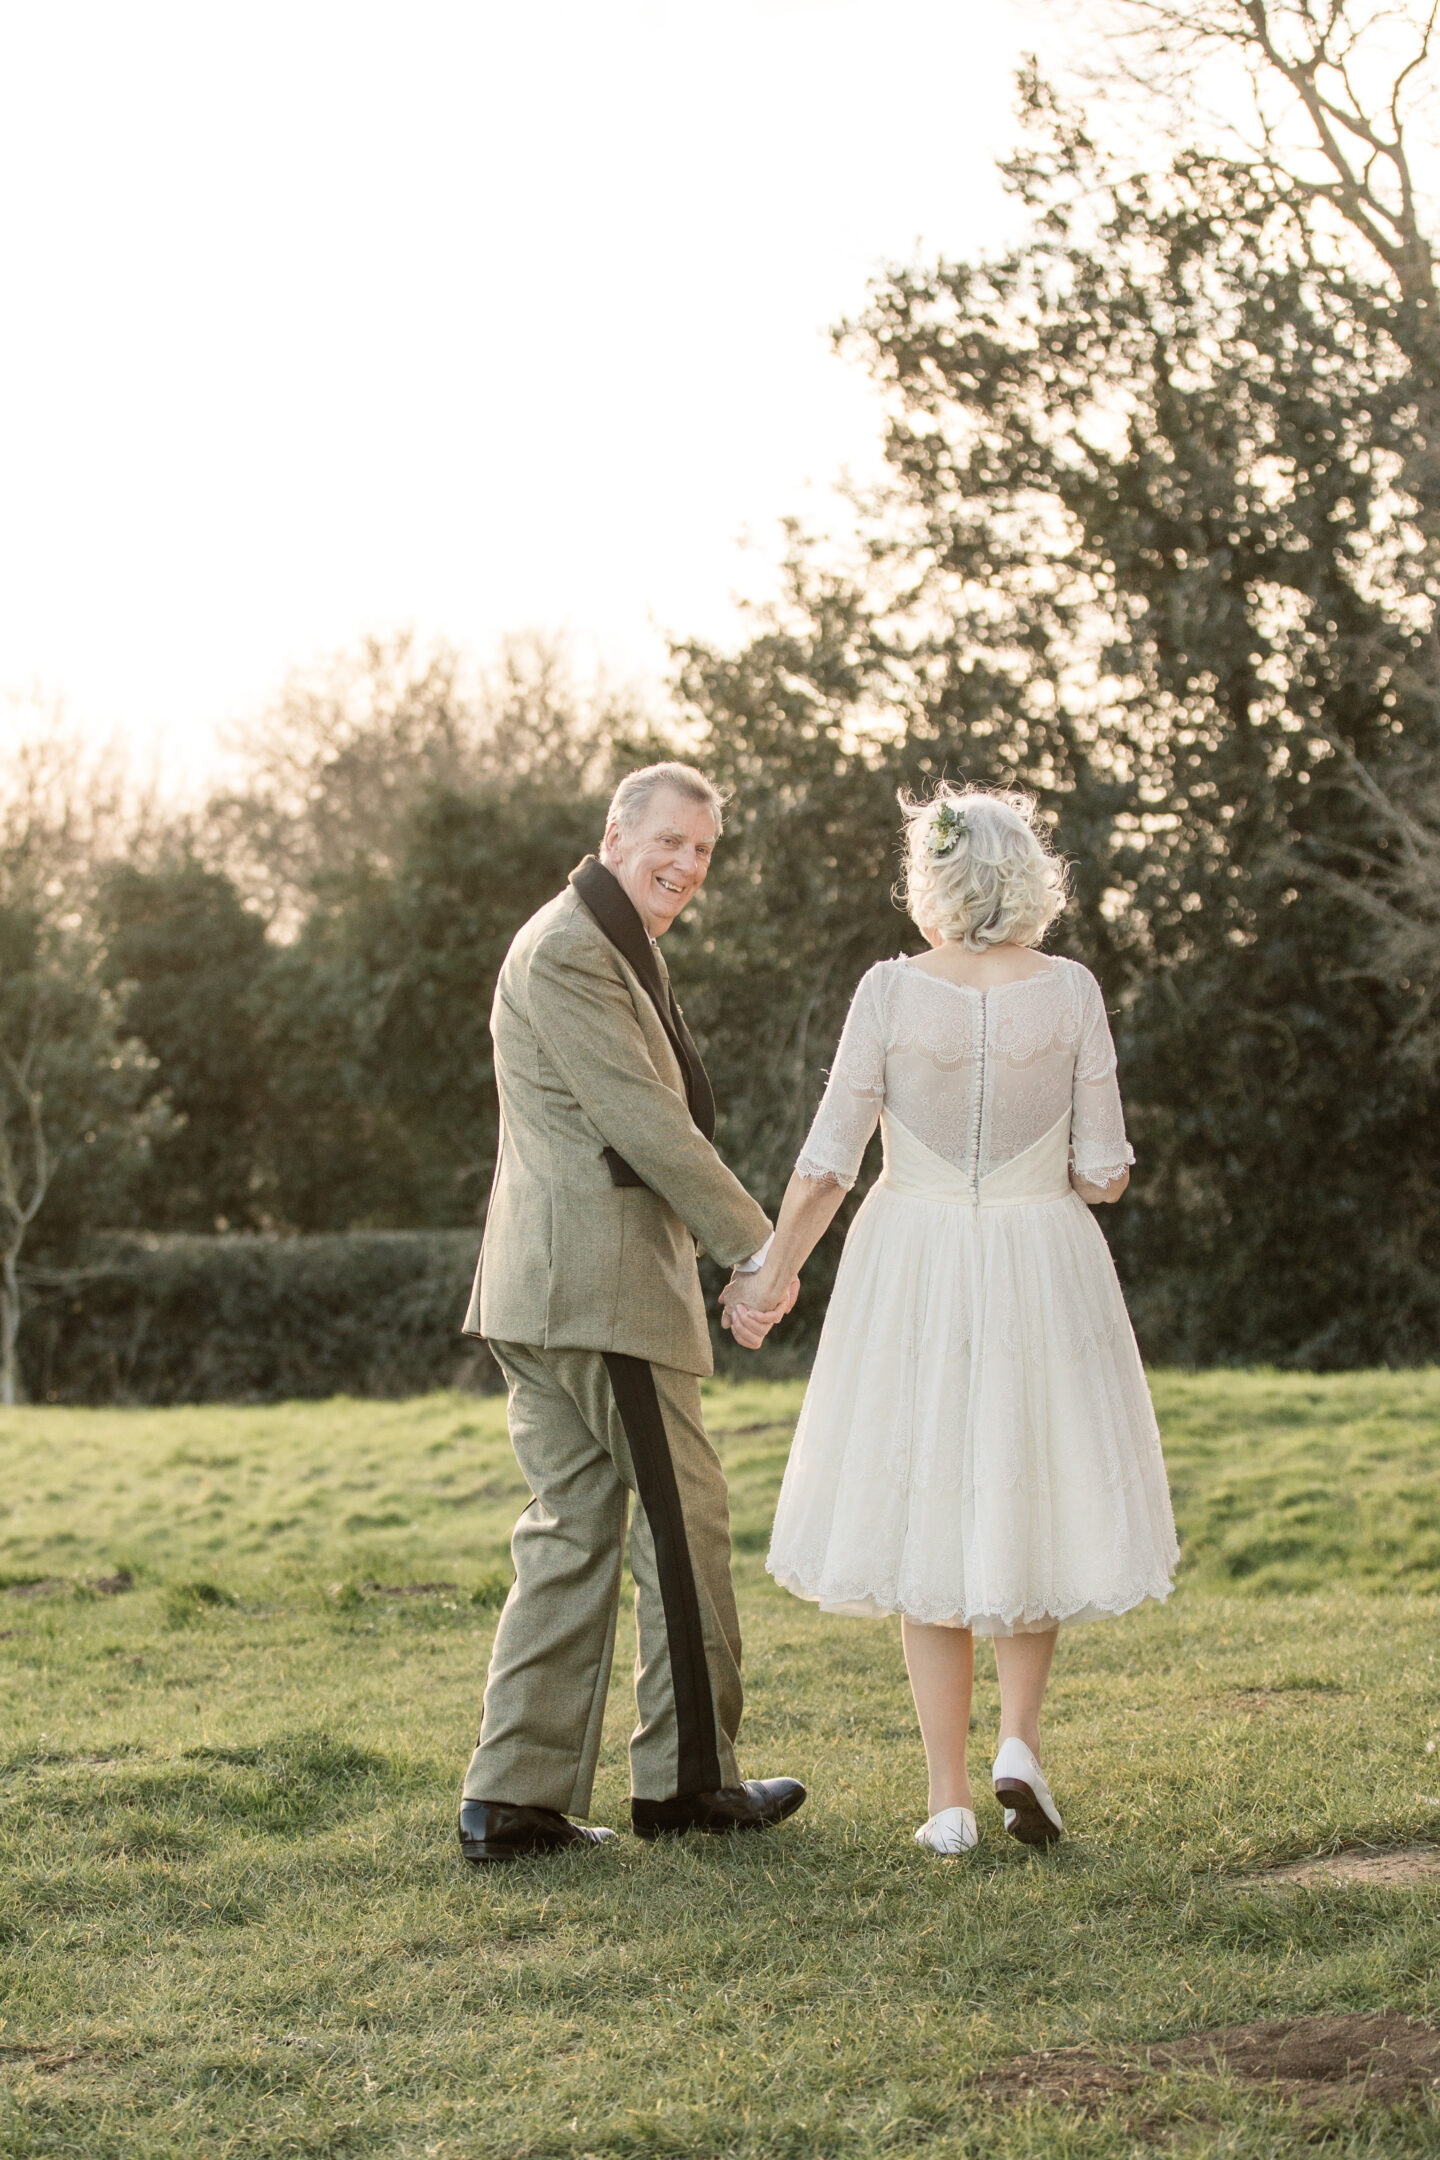 Eco-Friendly Vow Renewal at Clophill Eco Lodges Bedfordshire